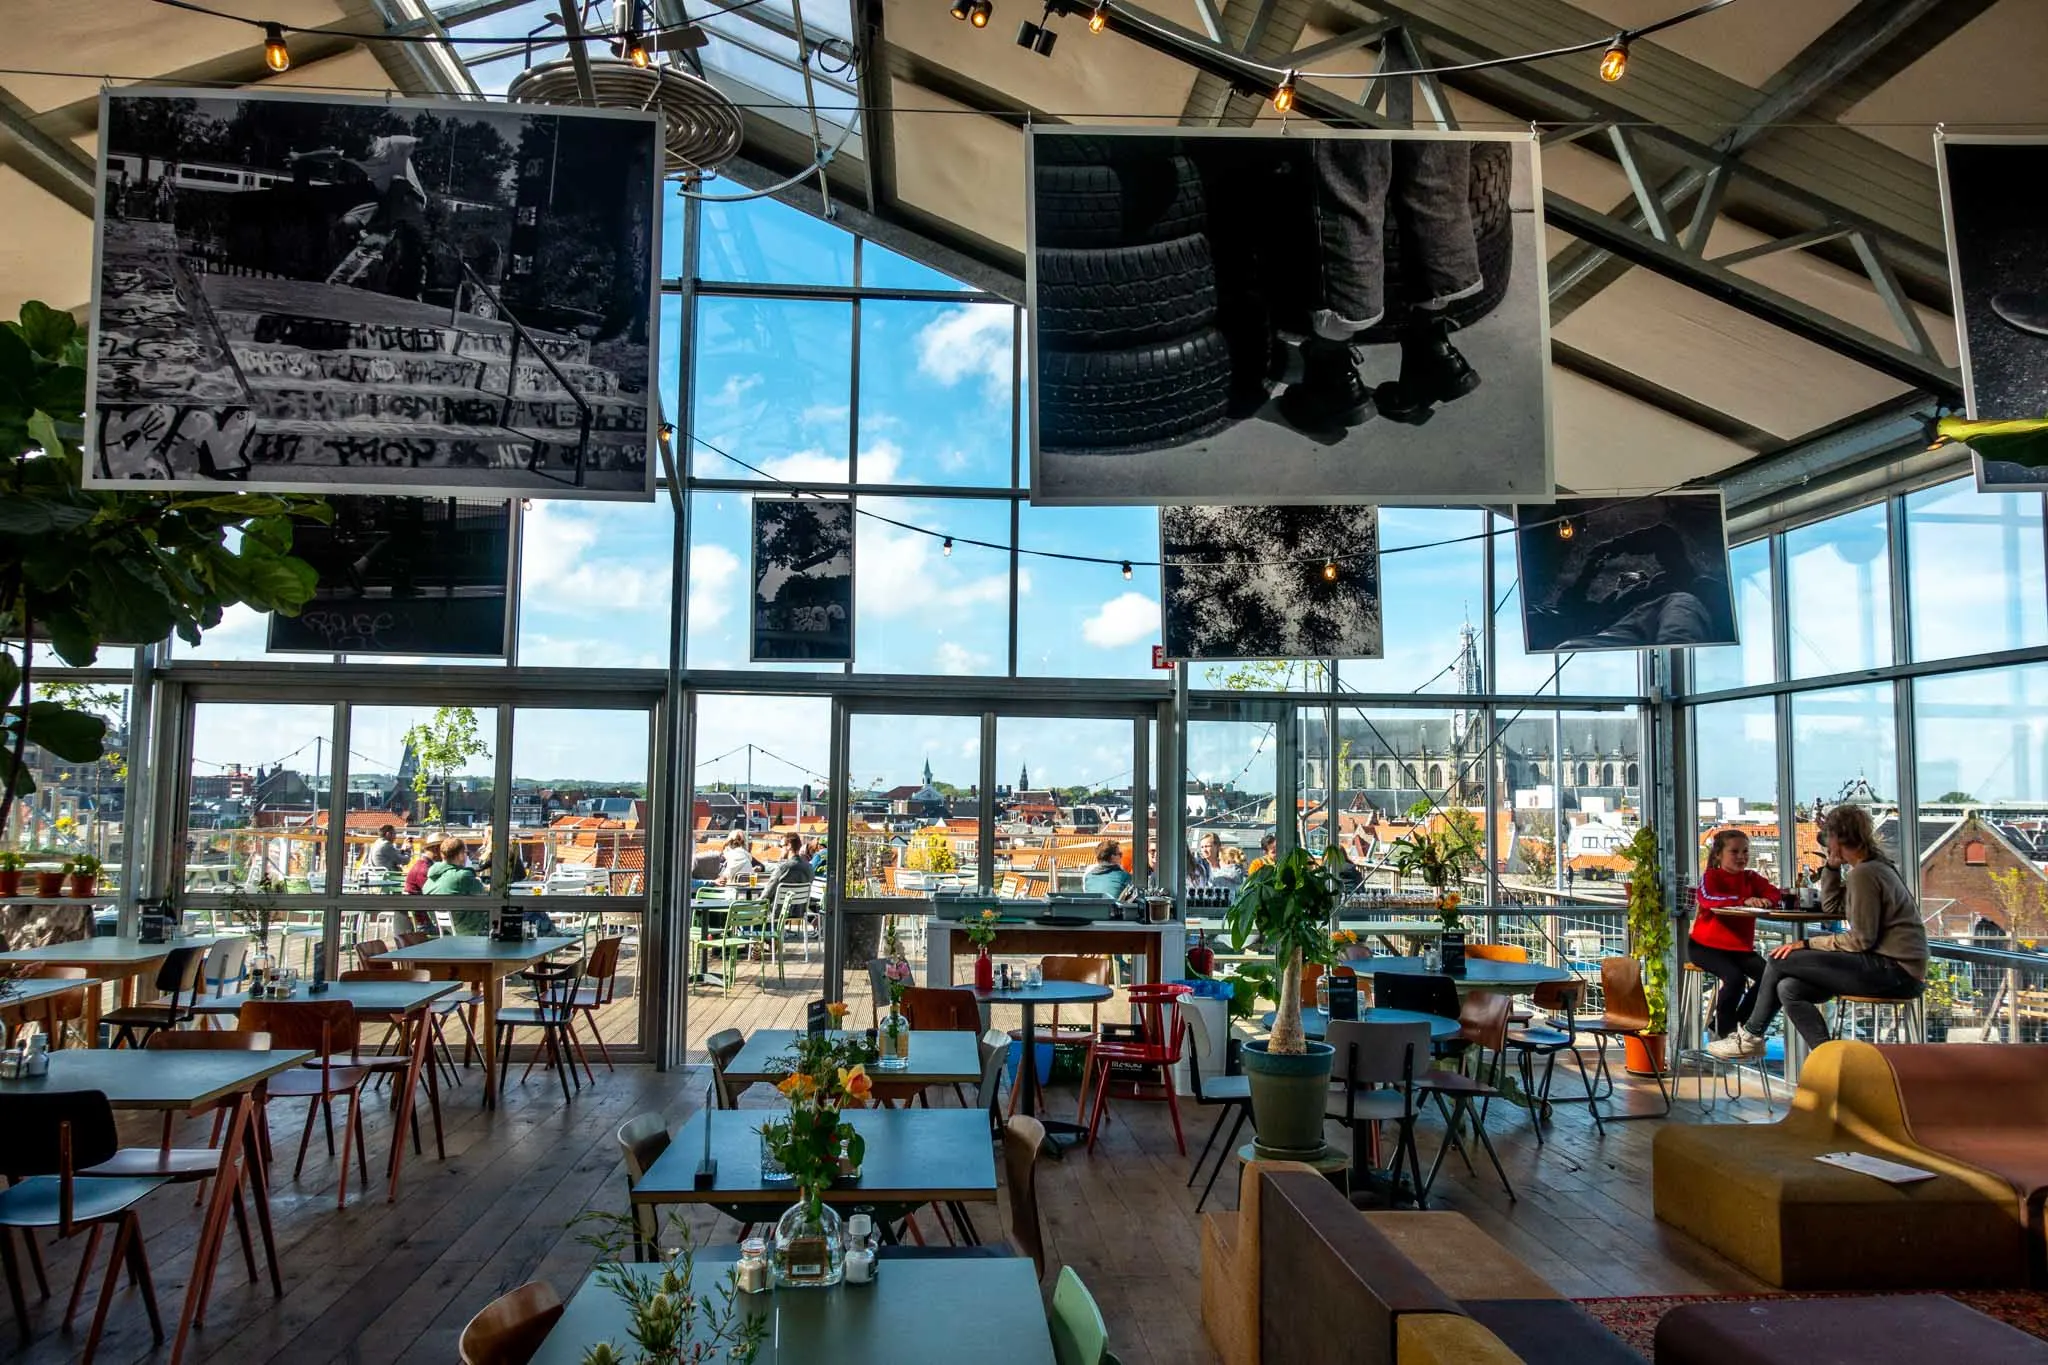 Tables inside a rooftop cafe with glass walls and a view over the city